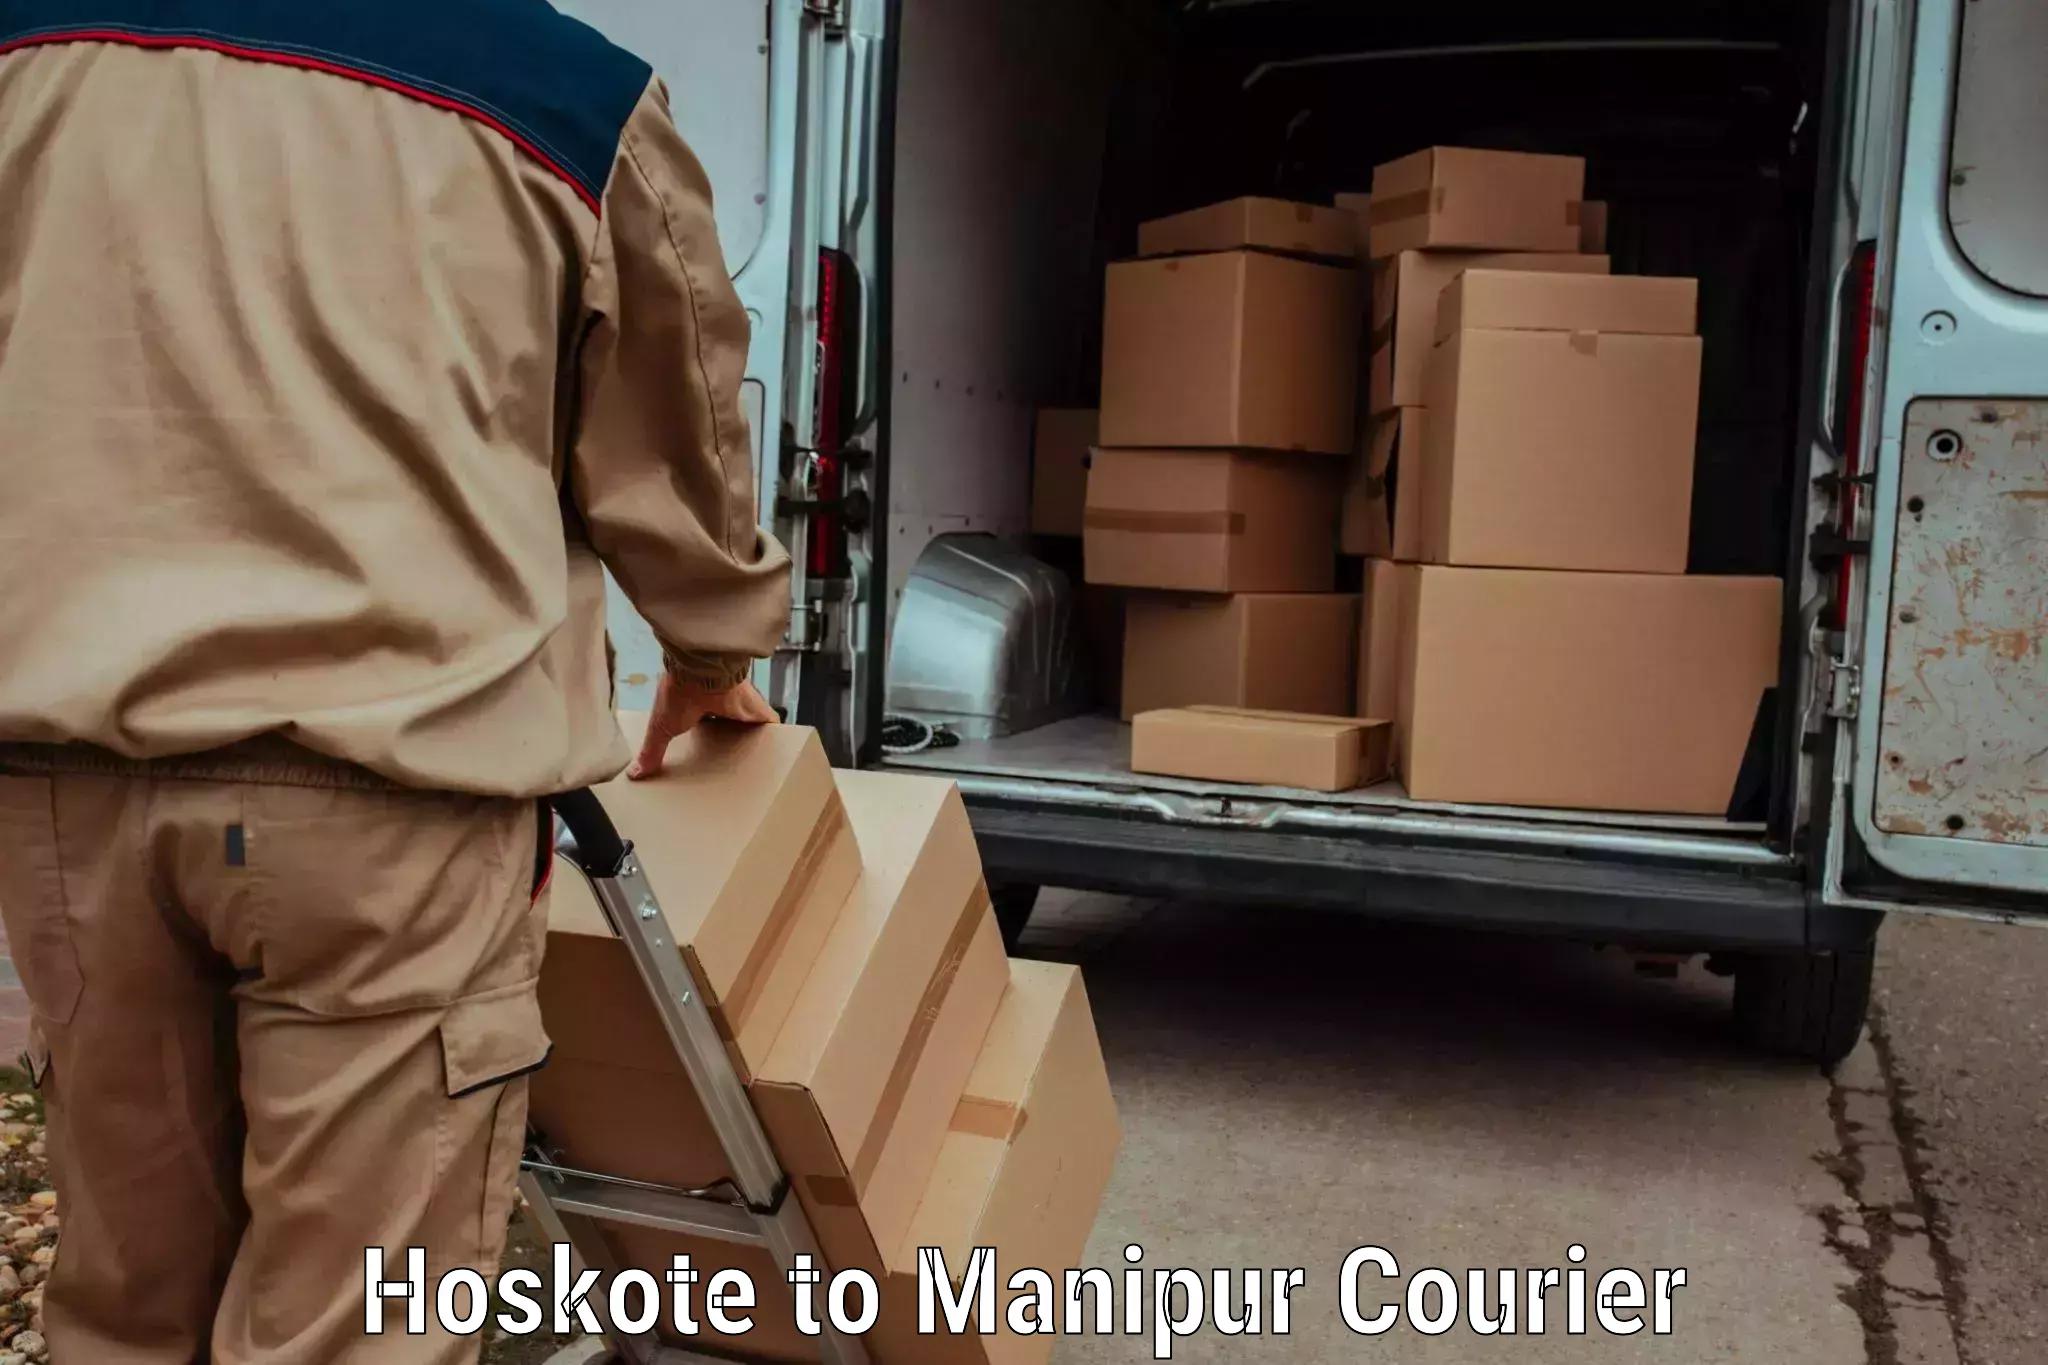 Next-day delivery options Hoskote to Manipur